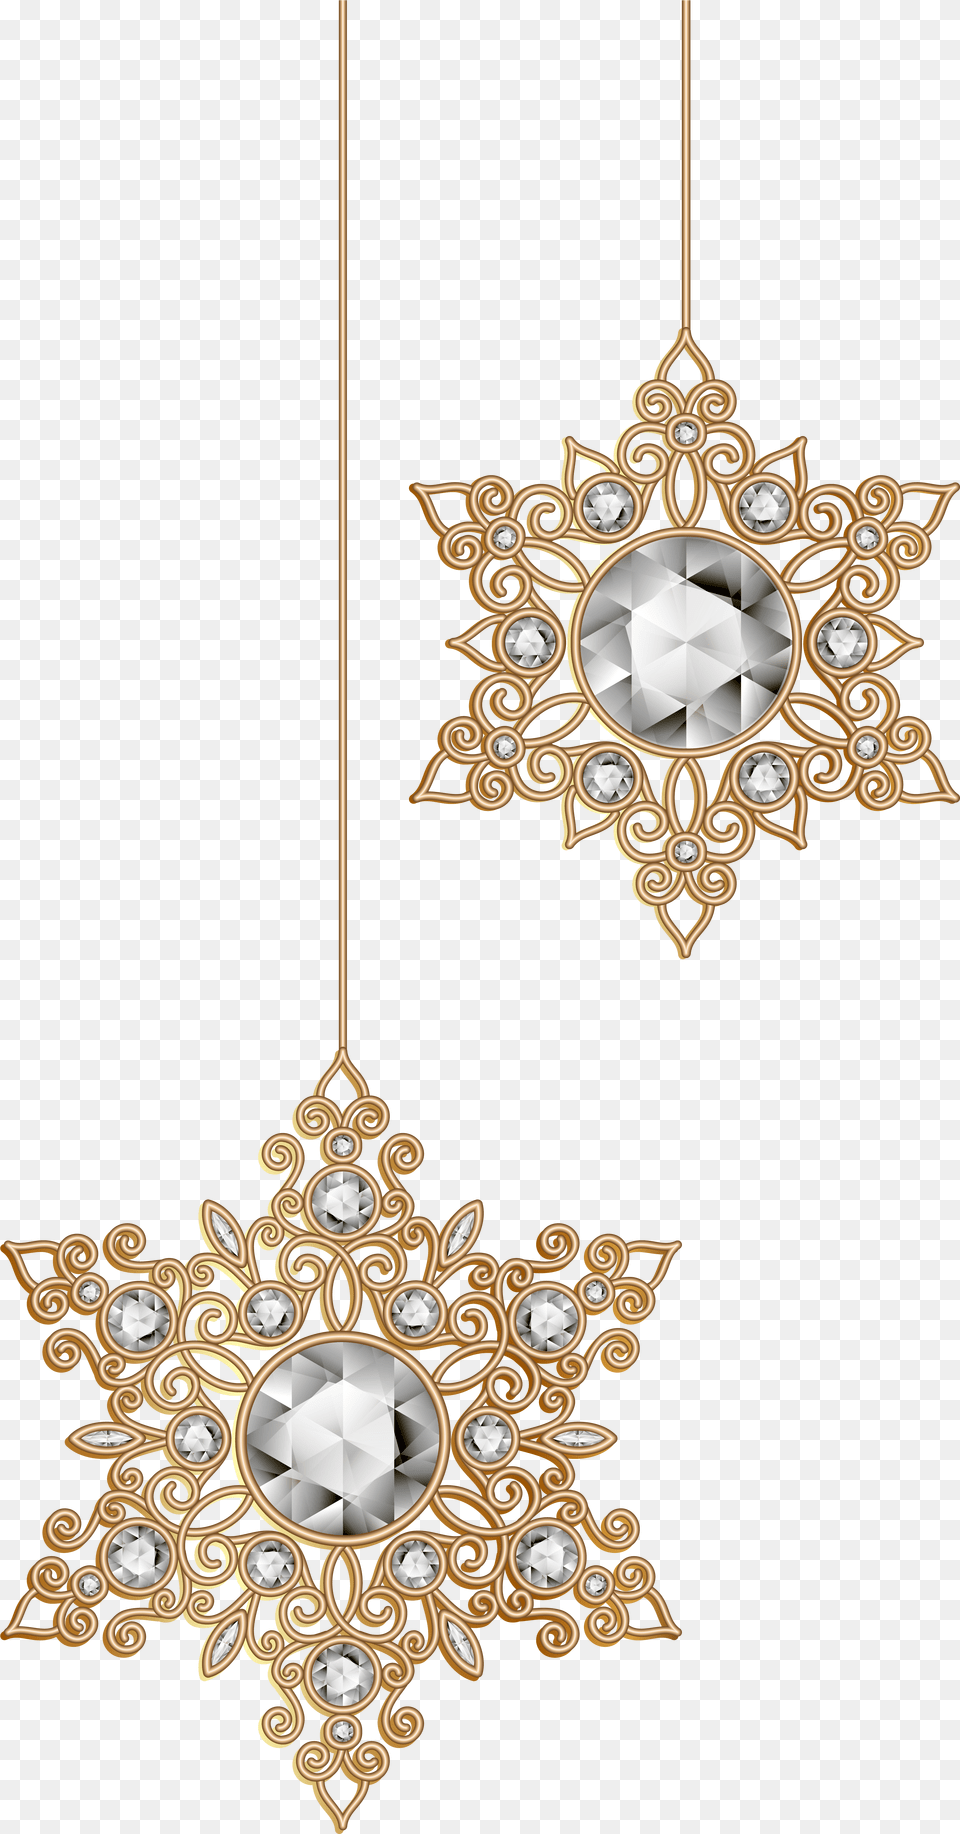 Ornament Snowflake Clipart Black And White Stock Snowflake Ornament, Accessories, Earring, Jewelry, Necklace Png Image